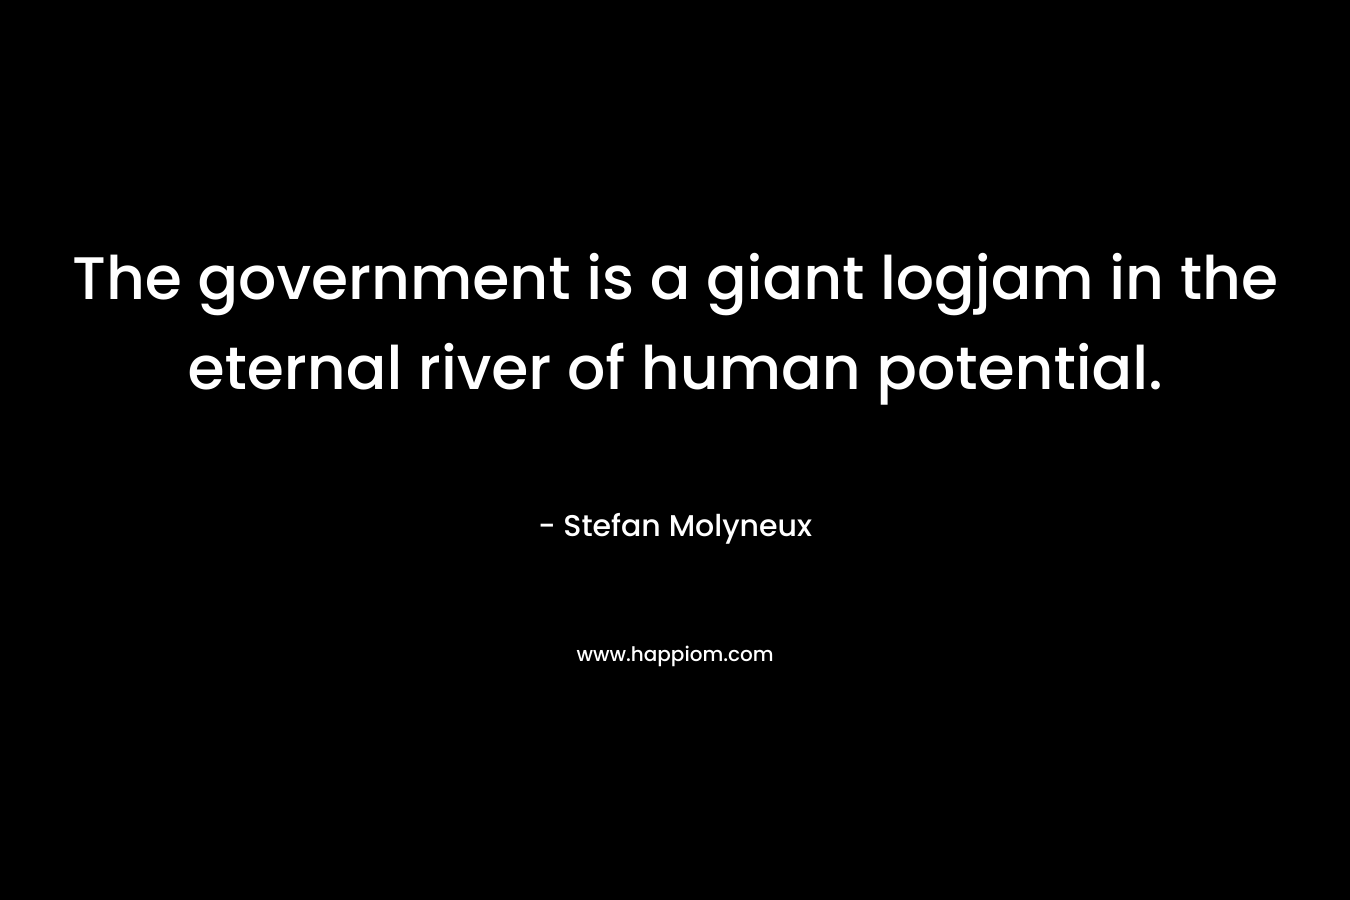 The government is a giant logjam in the eternal river of human potential. – Stefan Molyneux